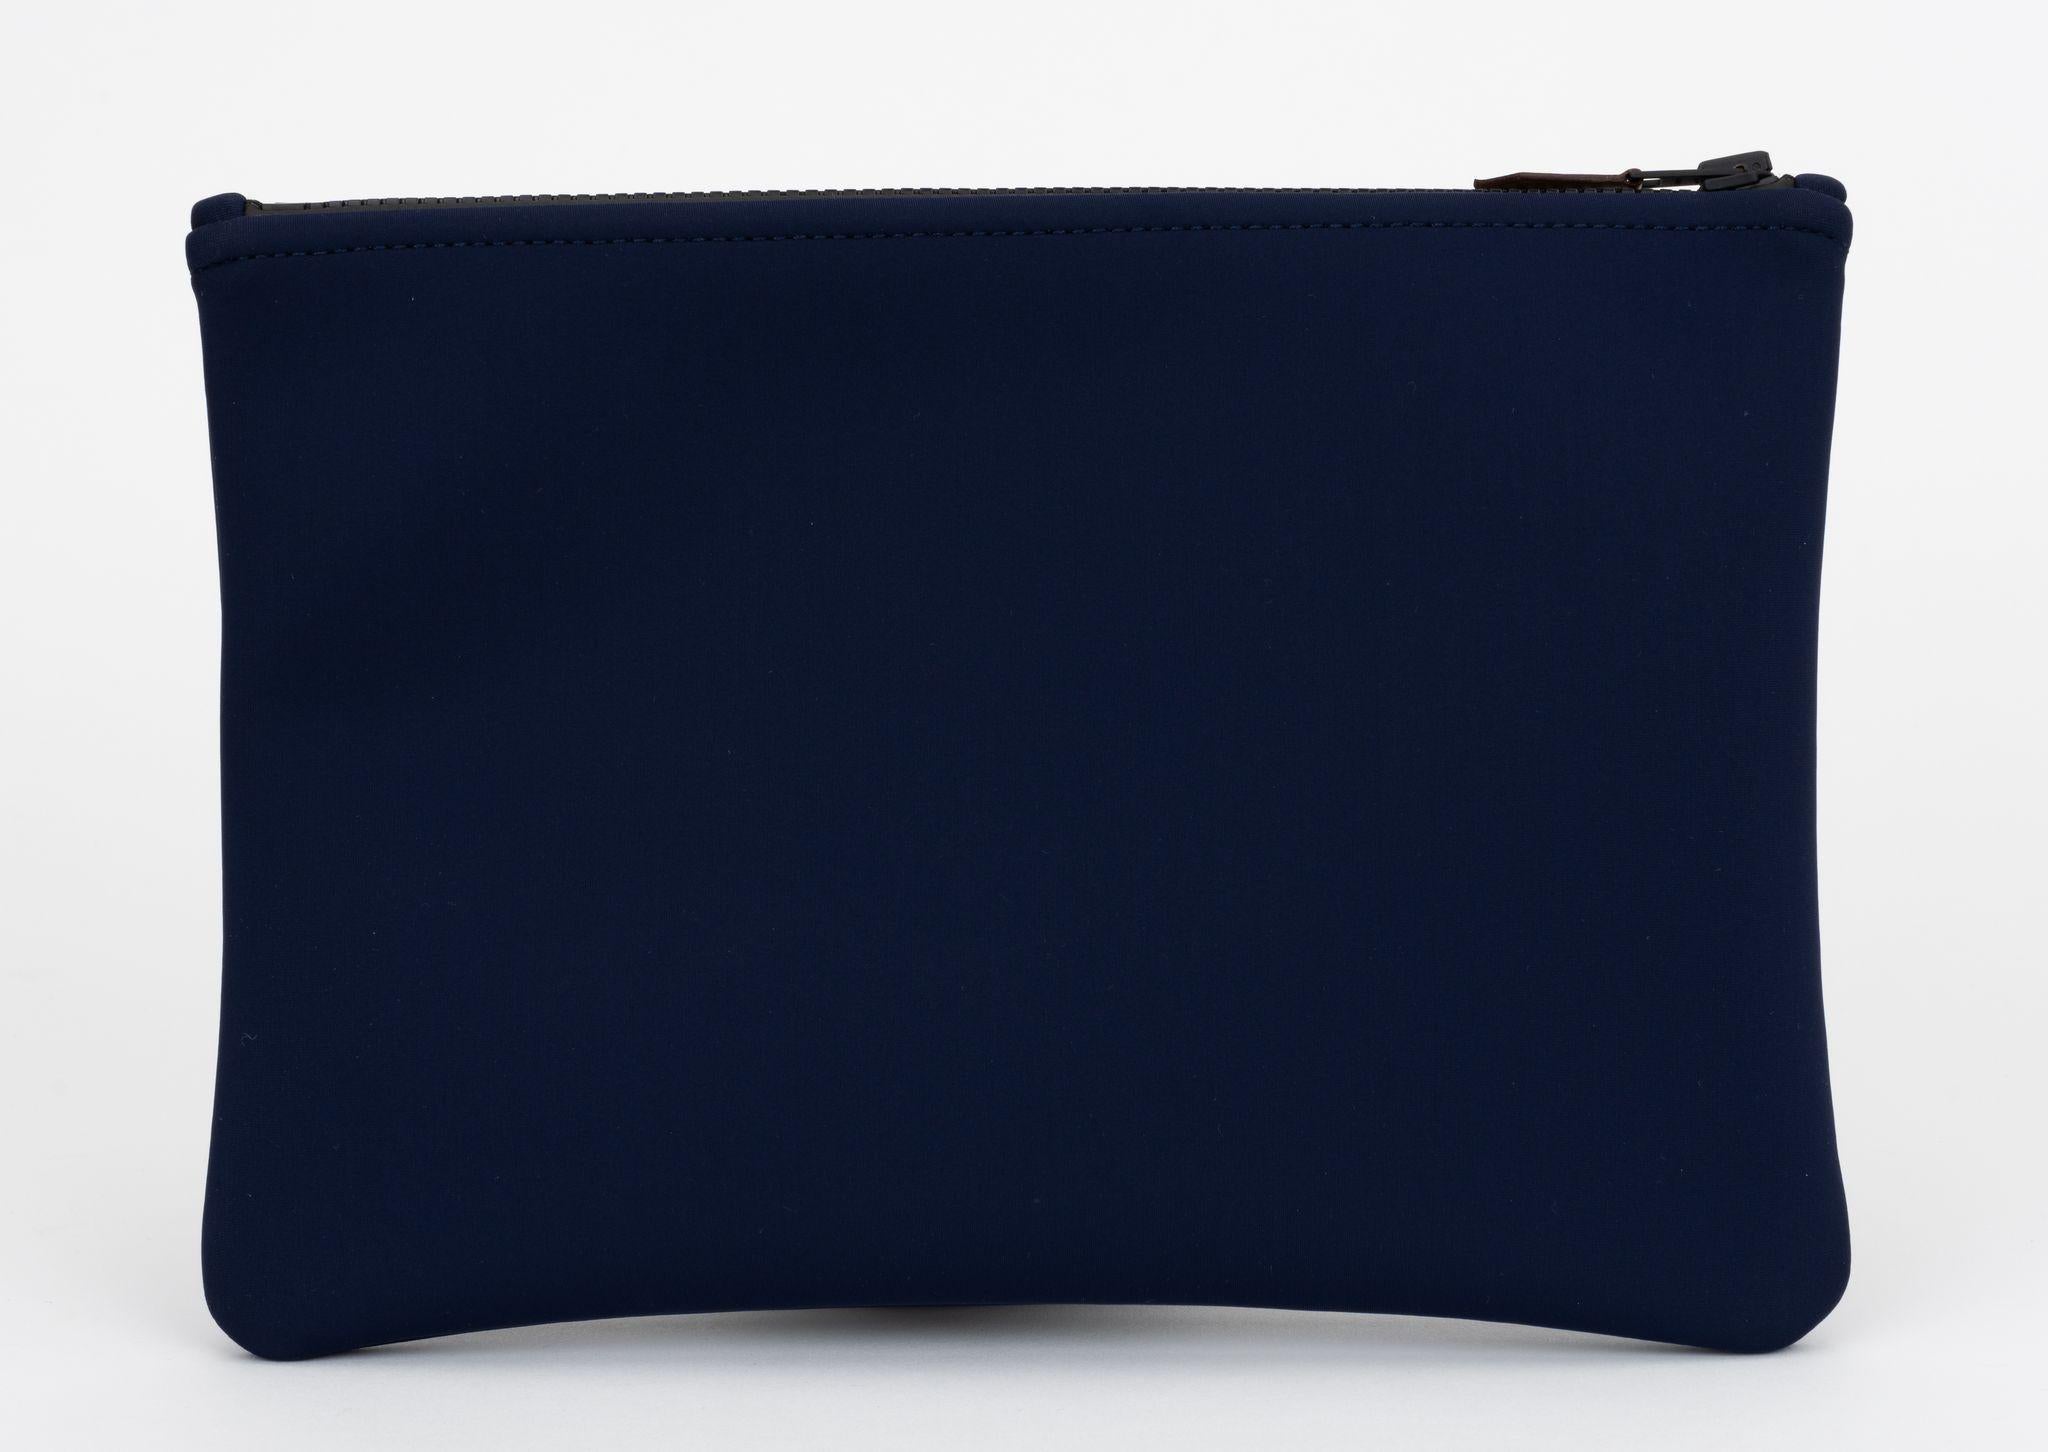 Hermès New Navy Neoprene Pouch In New Condition For Sale In West Hollywood, CA